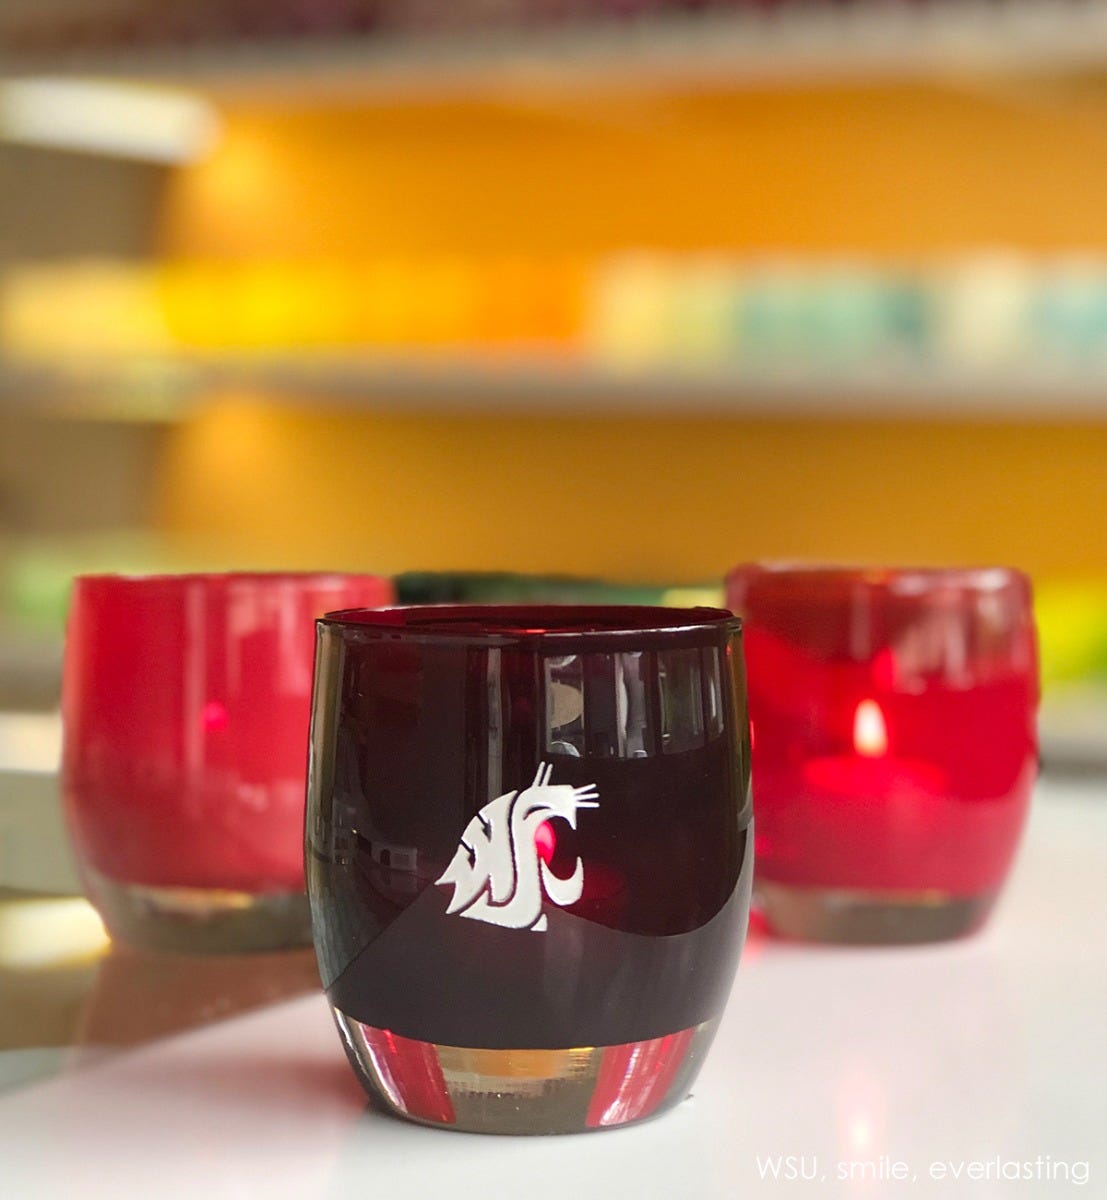 wsu, crimson with sandblasted washington state university etching hand painted in silver, hand-blown glass votive candle holder. Paired with everlasting and smile.